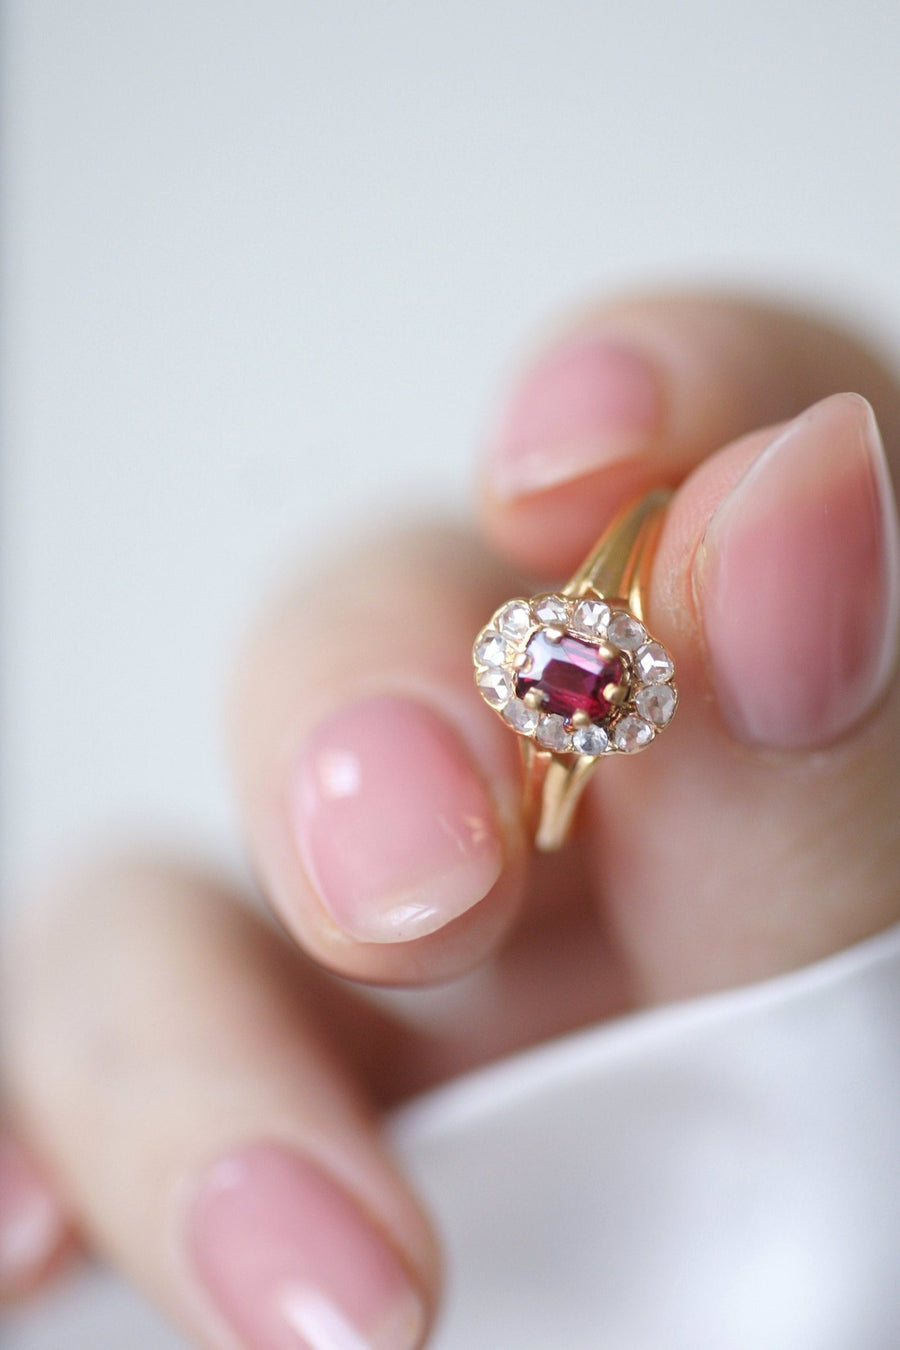 Ruby engagement ring with diamonds - Penelope Gallery